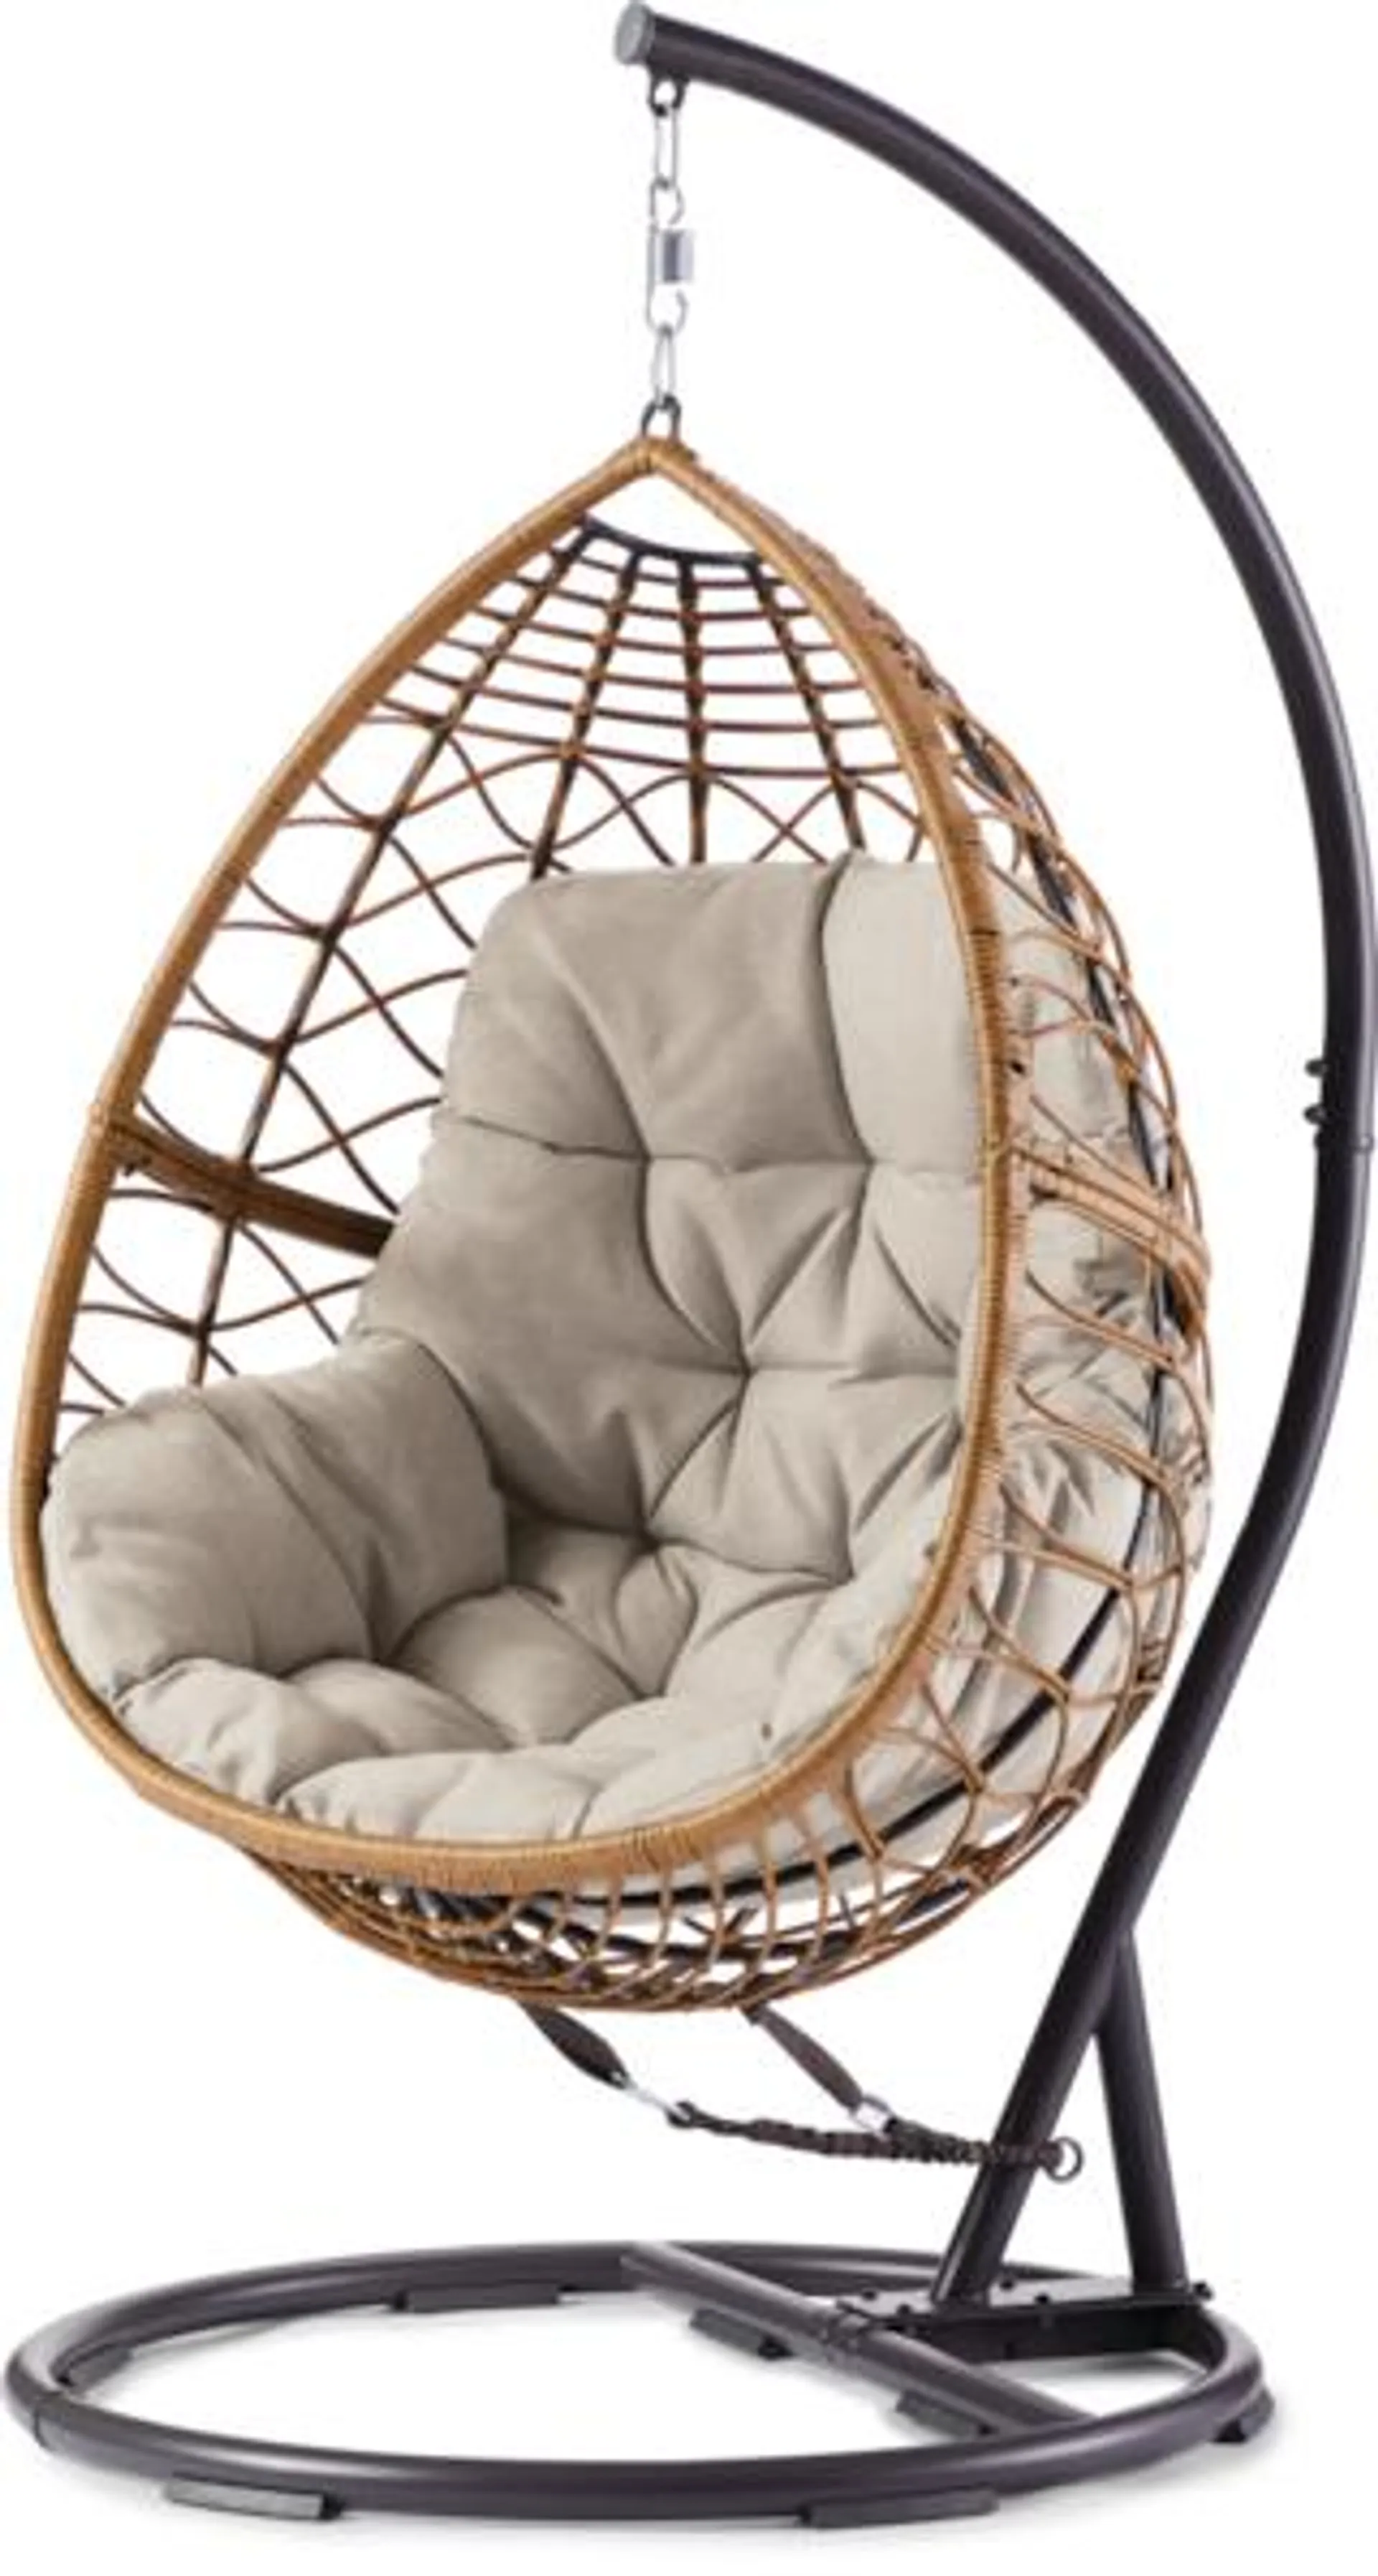 CANVAS Sydney All Weather Single Outdoor Patio Egg Swing Chair w/ Stand